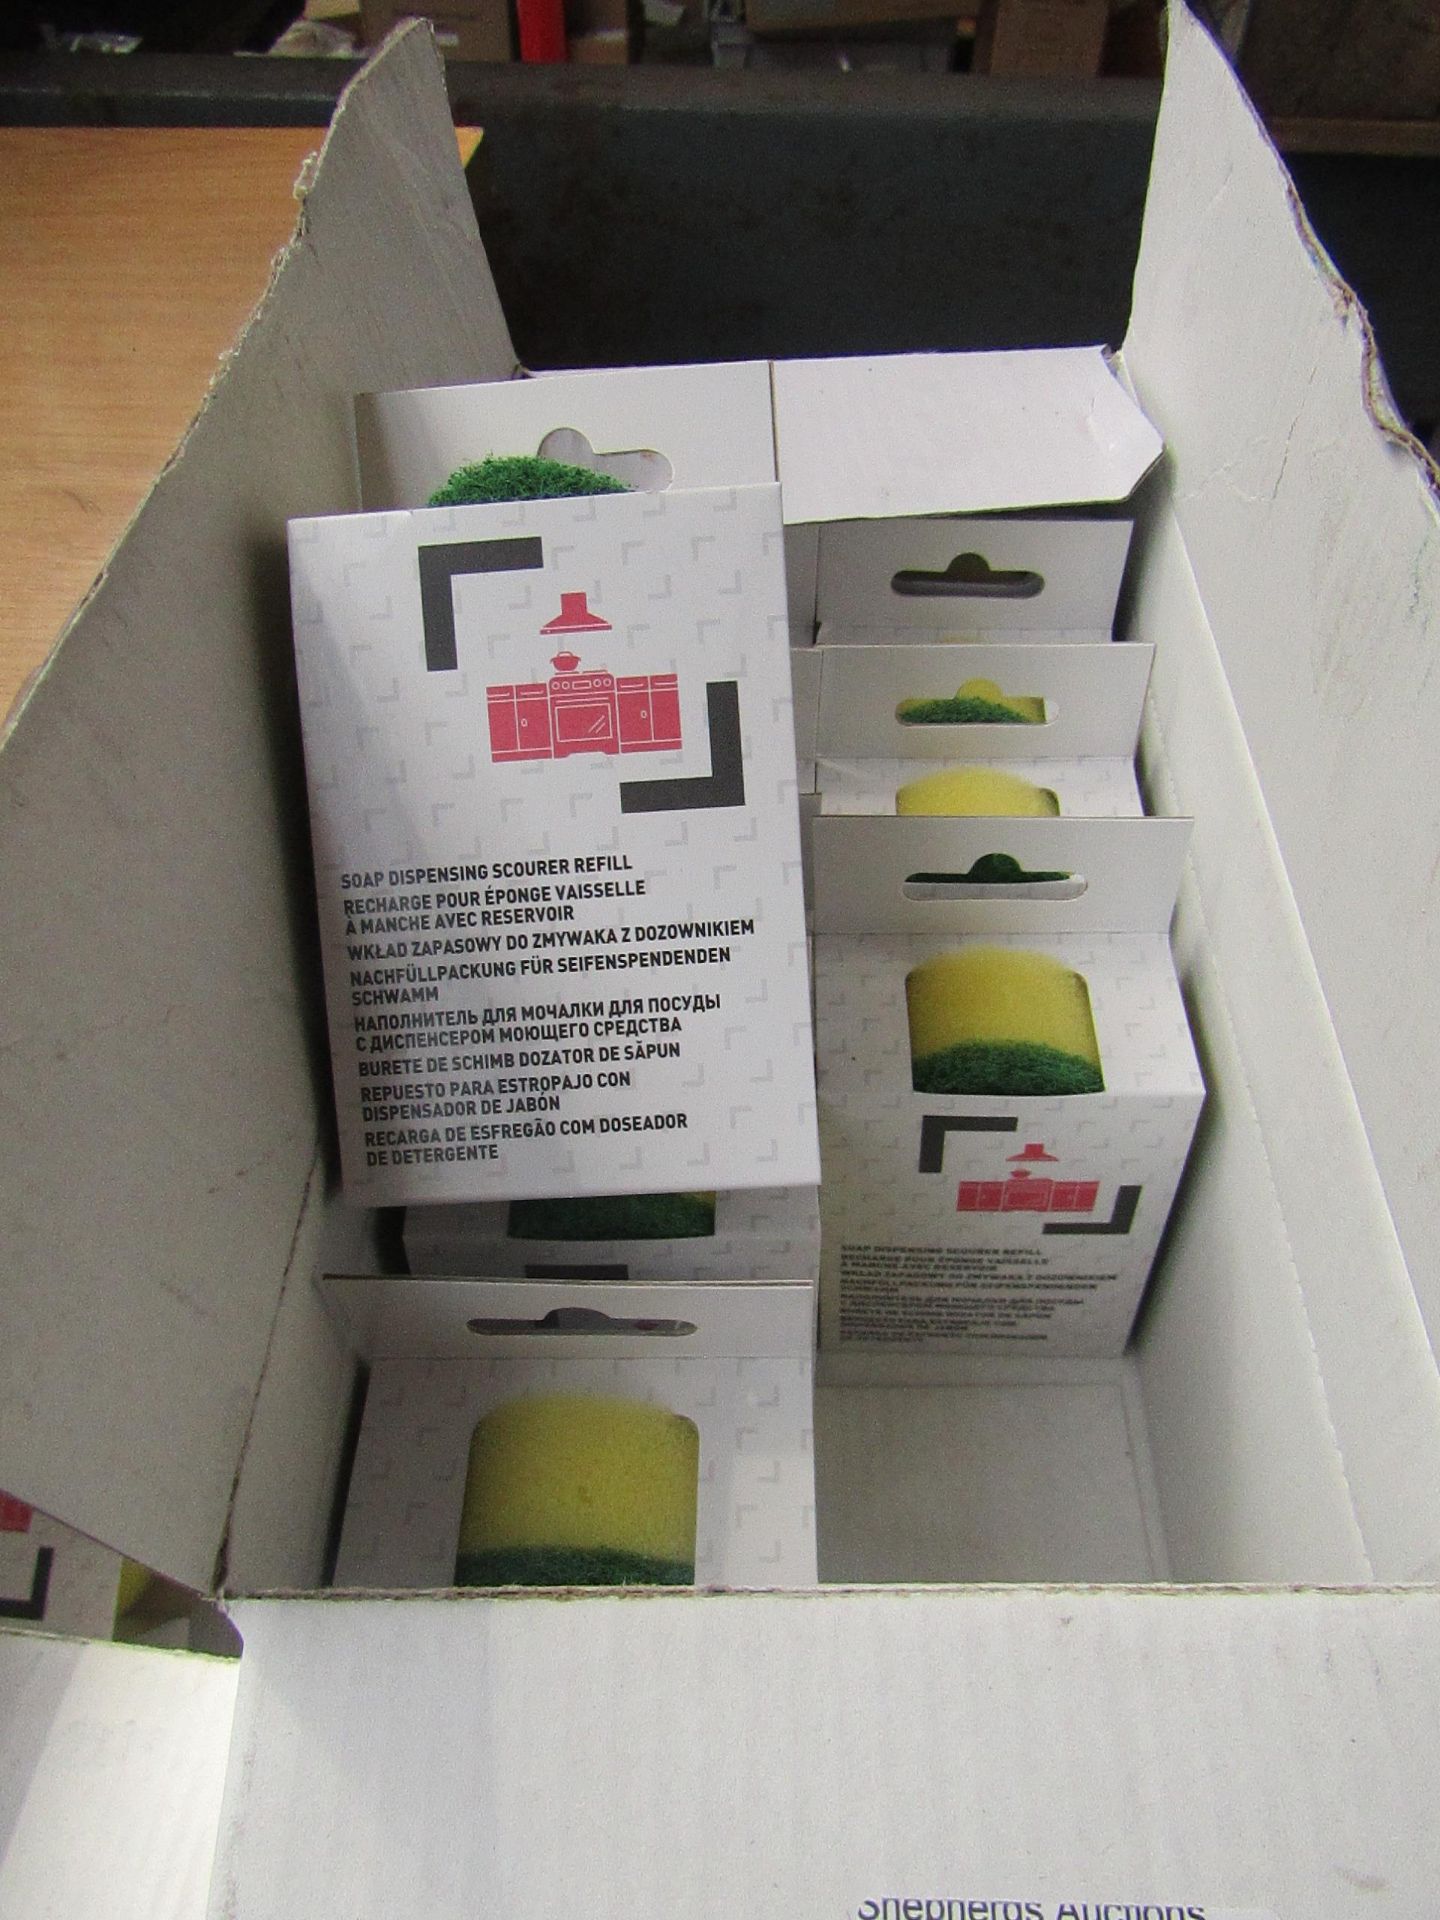 1X BOX CONTAINING APPROX 12 SOAP DISPENSING SCOURER REFIL, NEW IN BOX